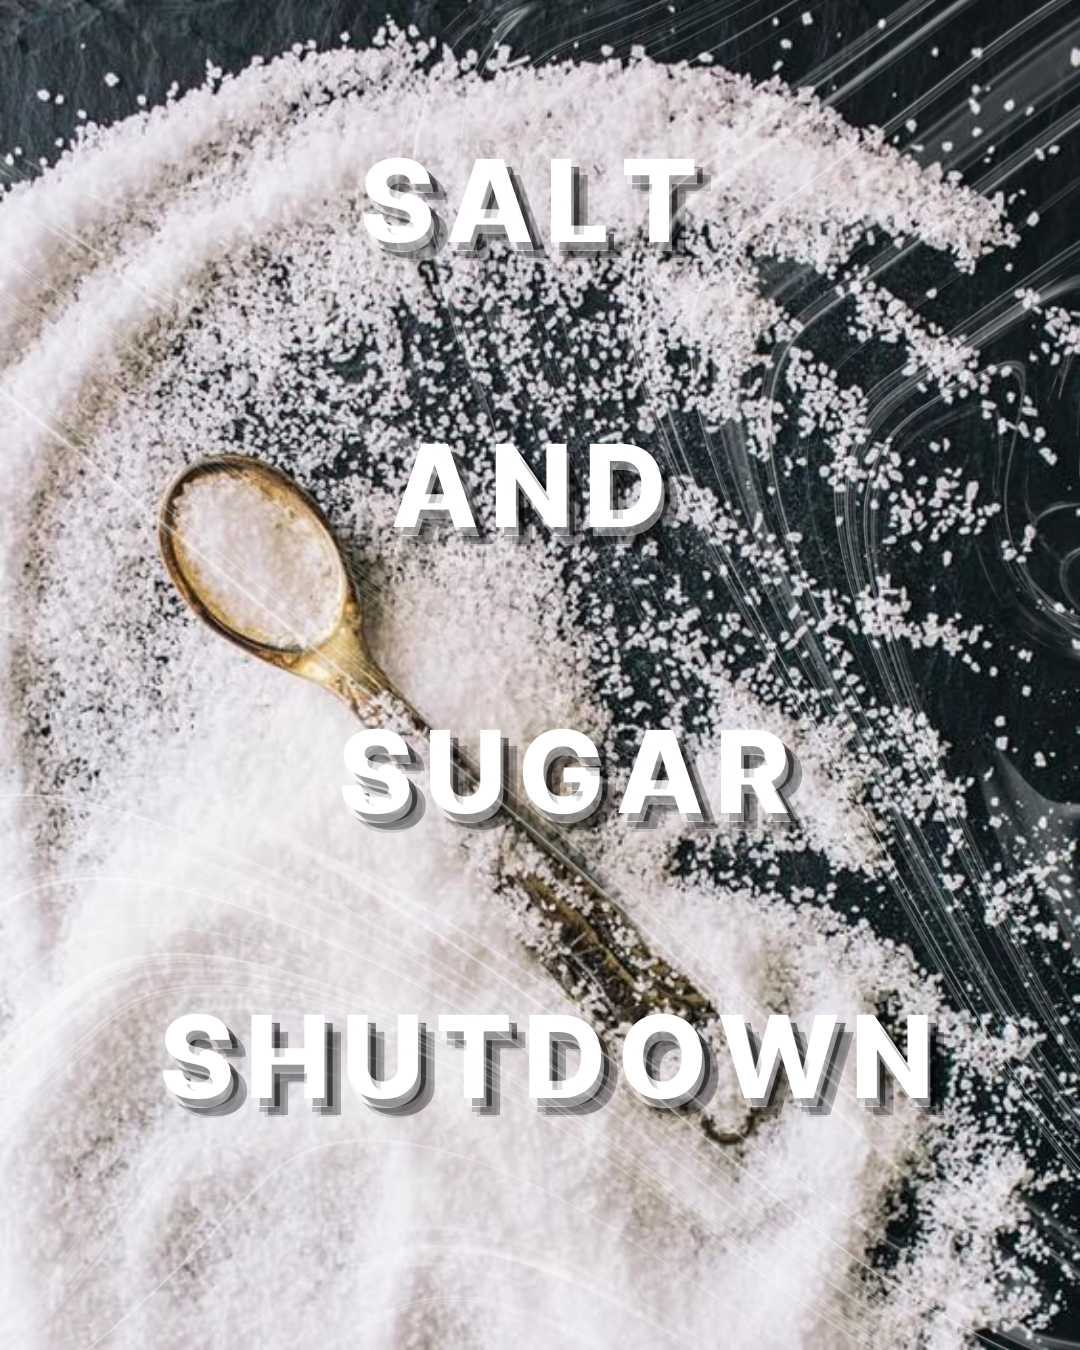 The Sweet and Salty Shutdown: How Sugar and Salt are decaying our body